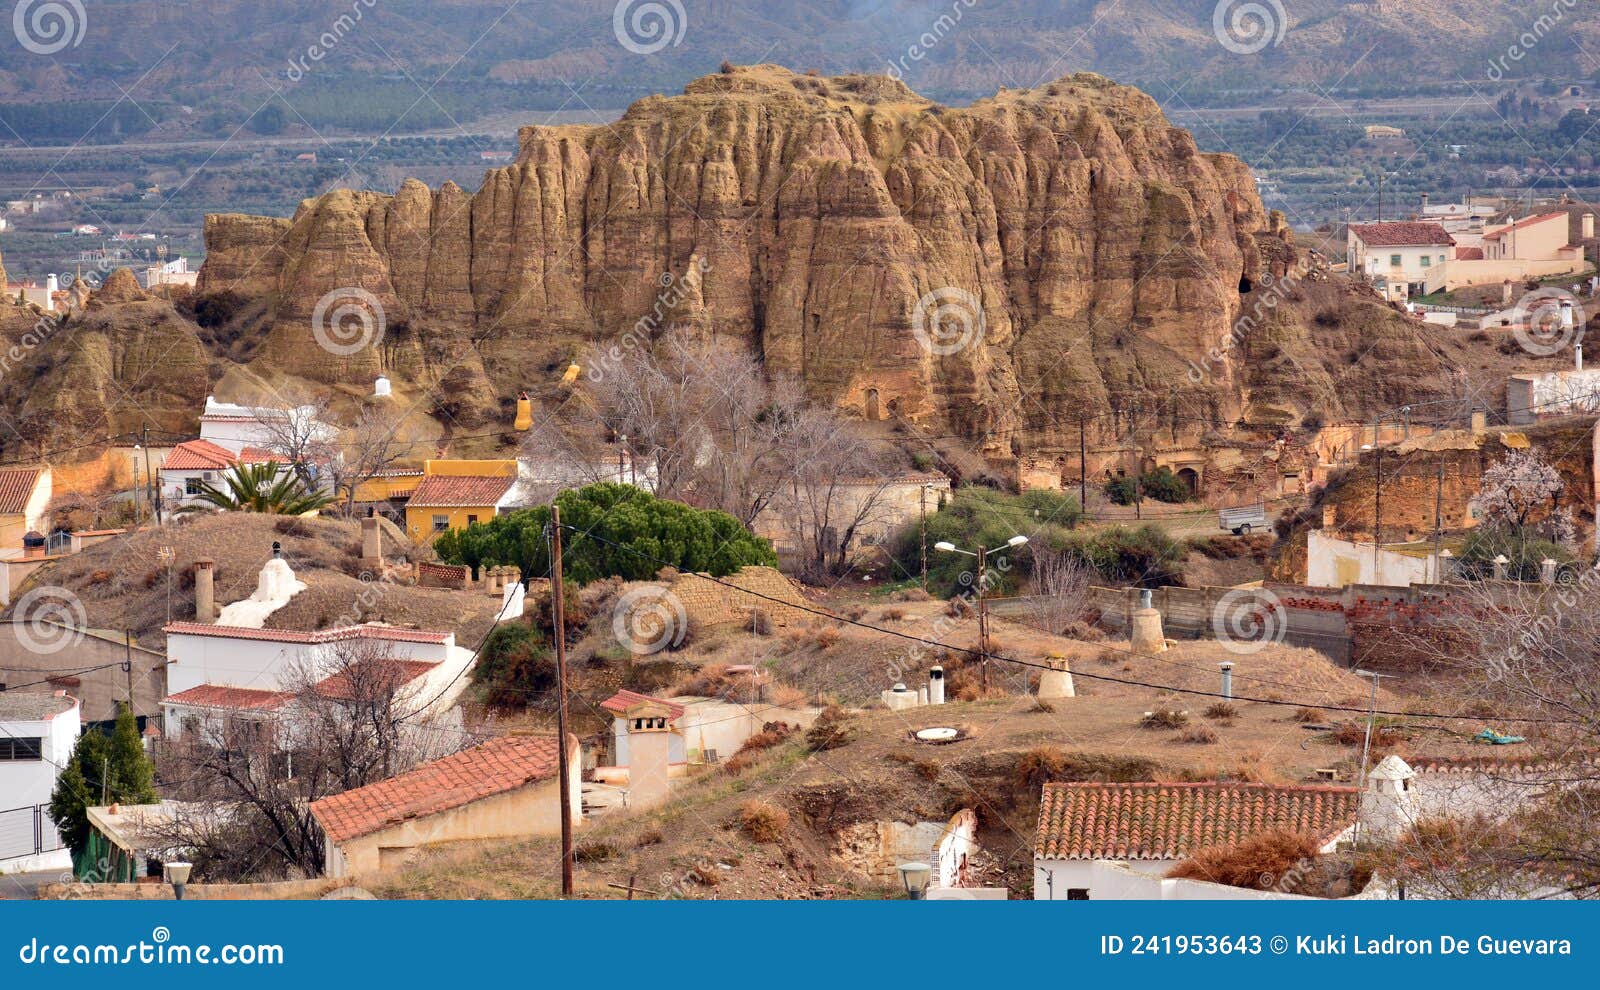 view of the neighborhood of the caves of guadix